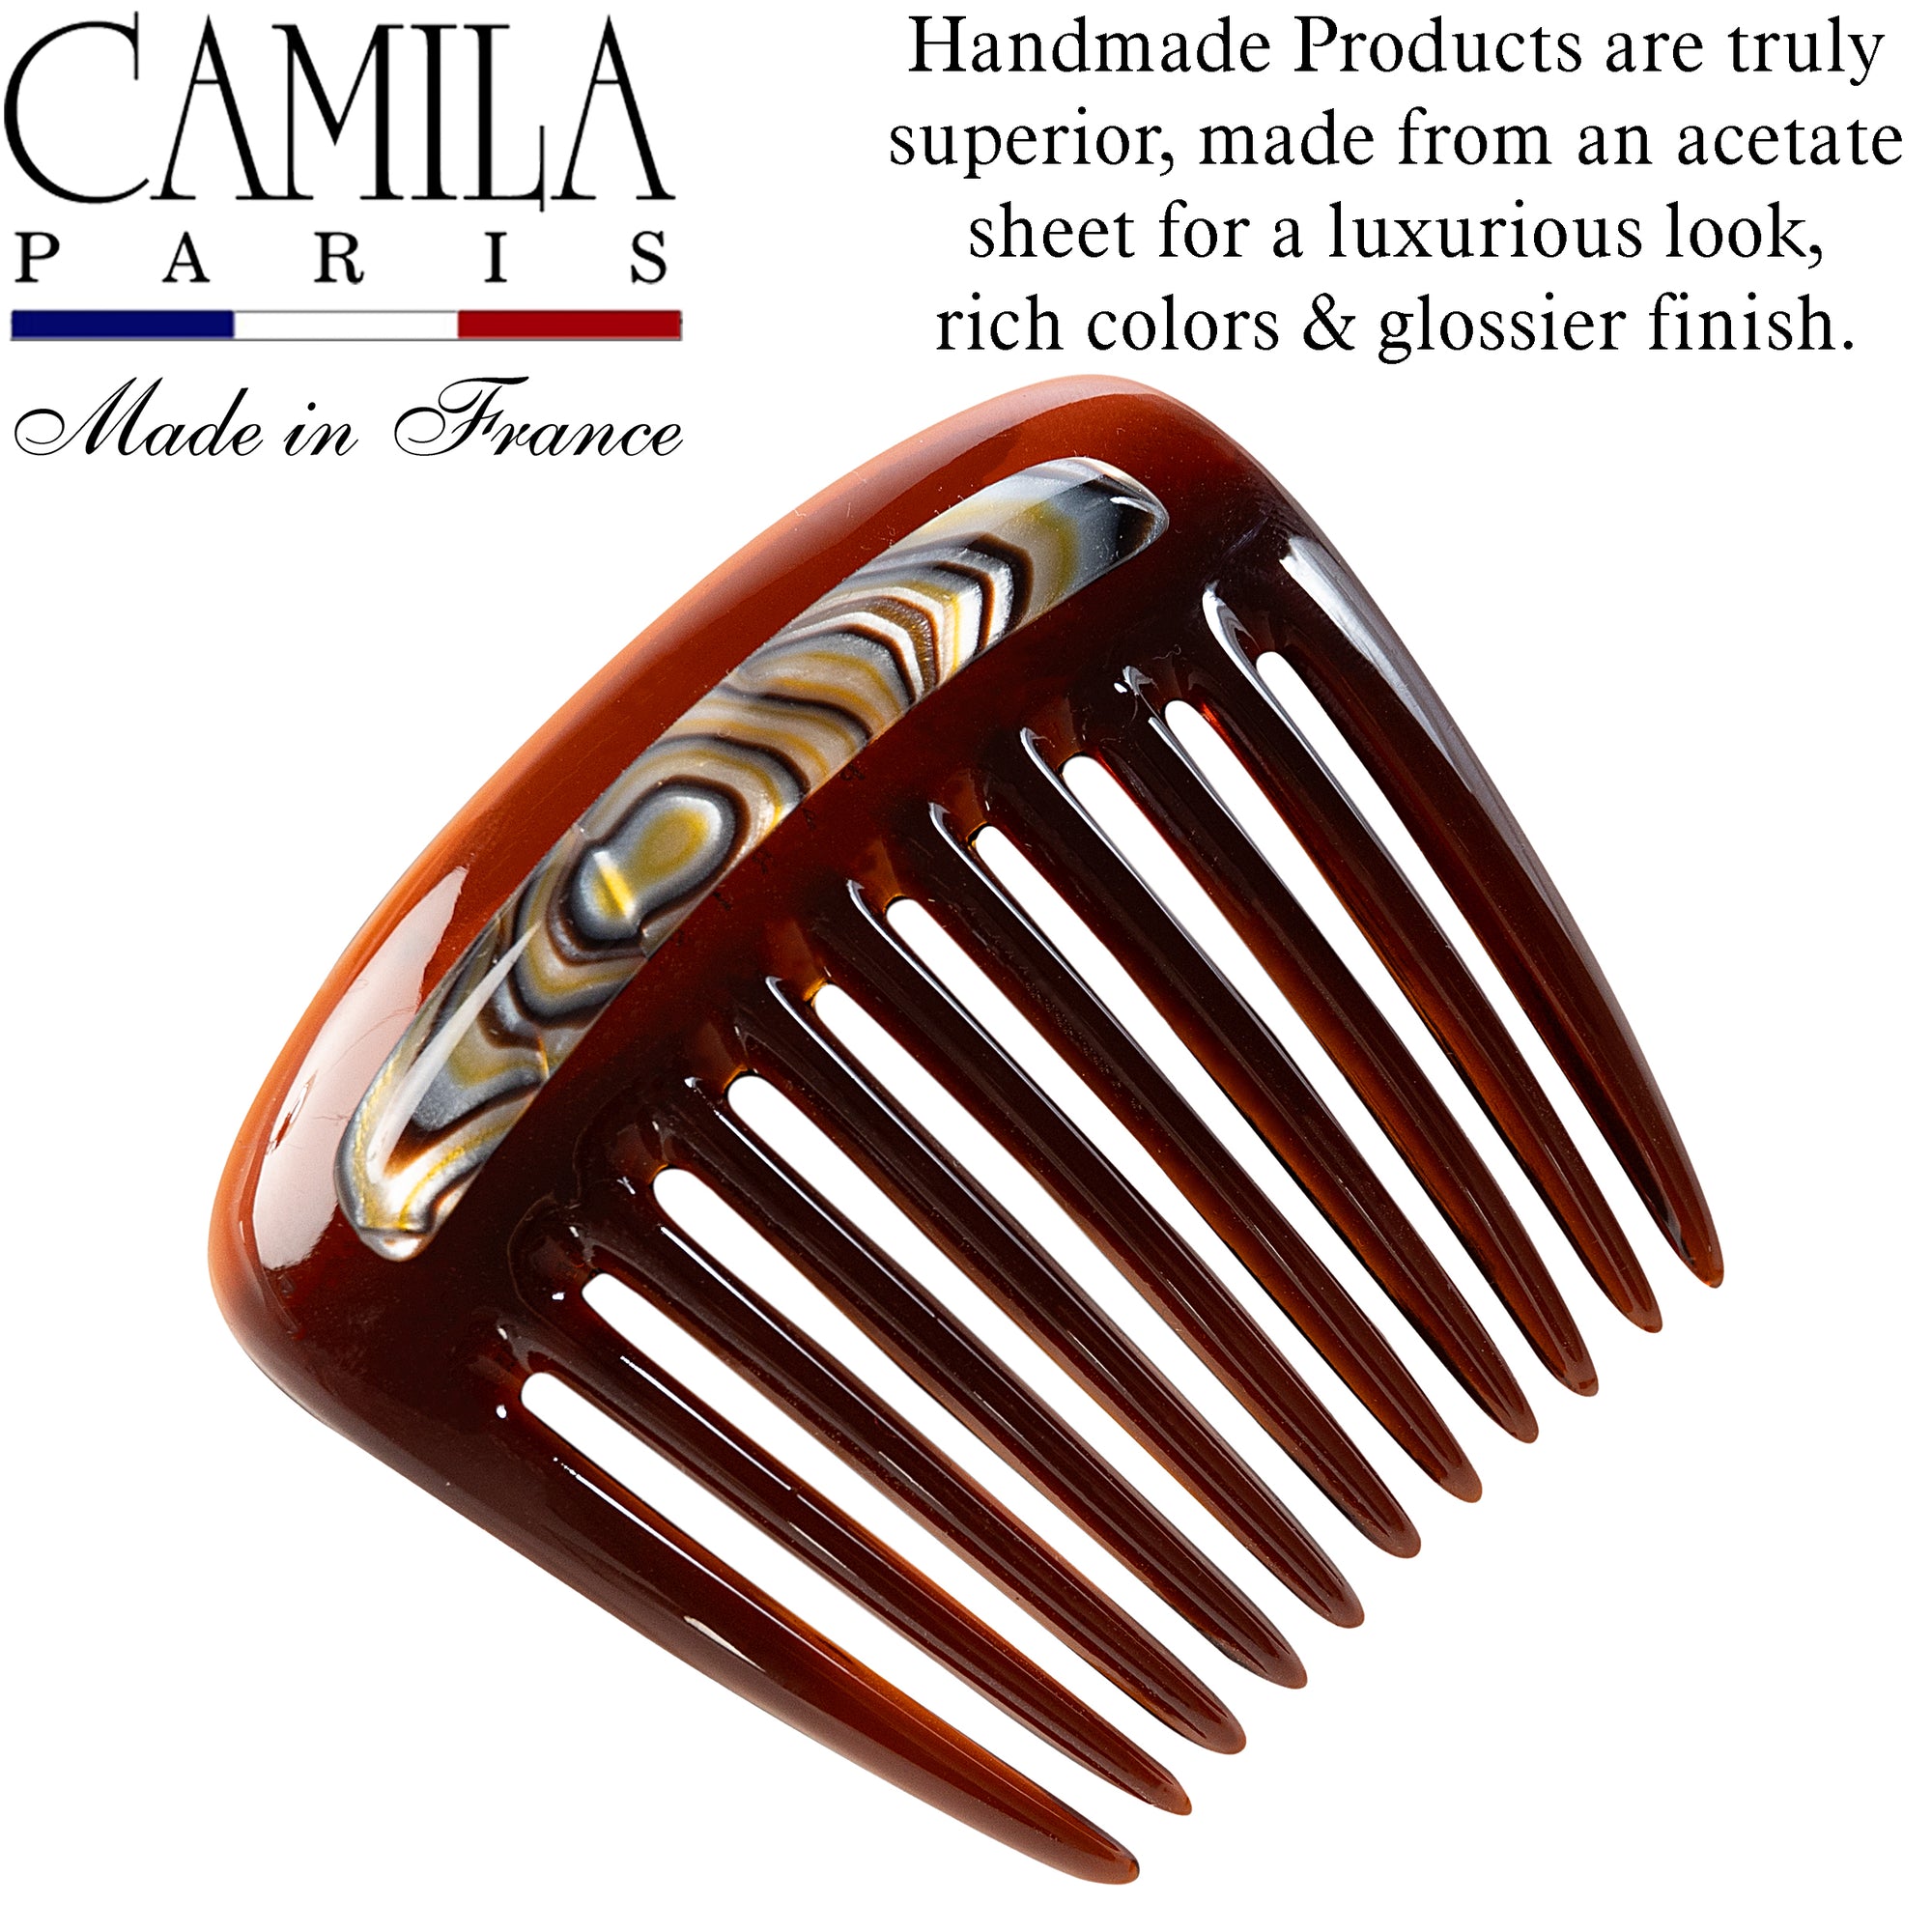 Camila Paris Hair Side Comb Charlotte Small Decorative Made in France